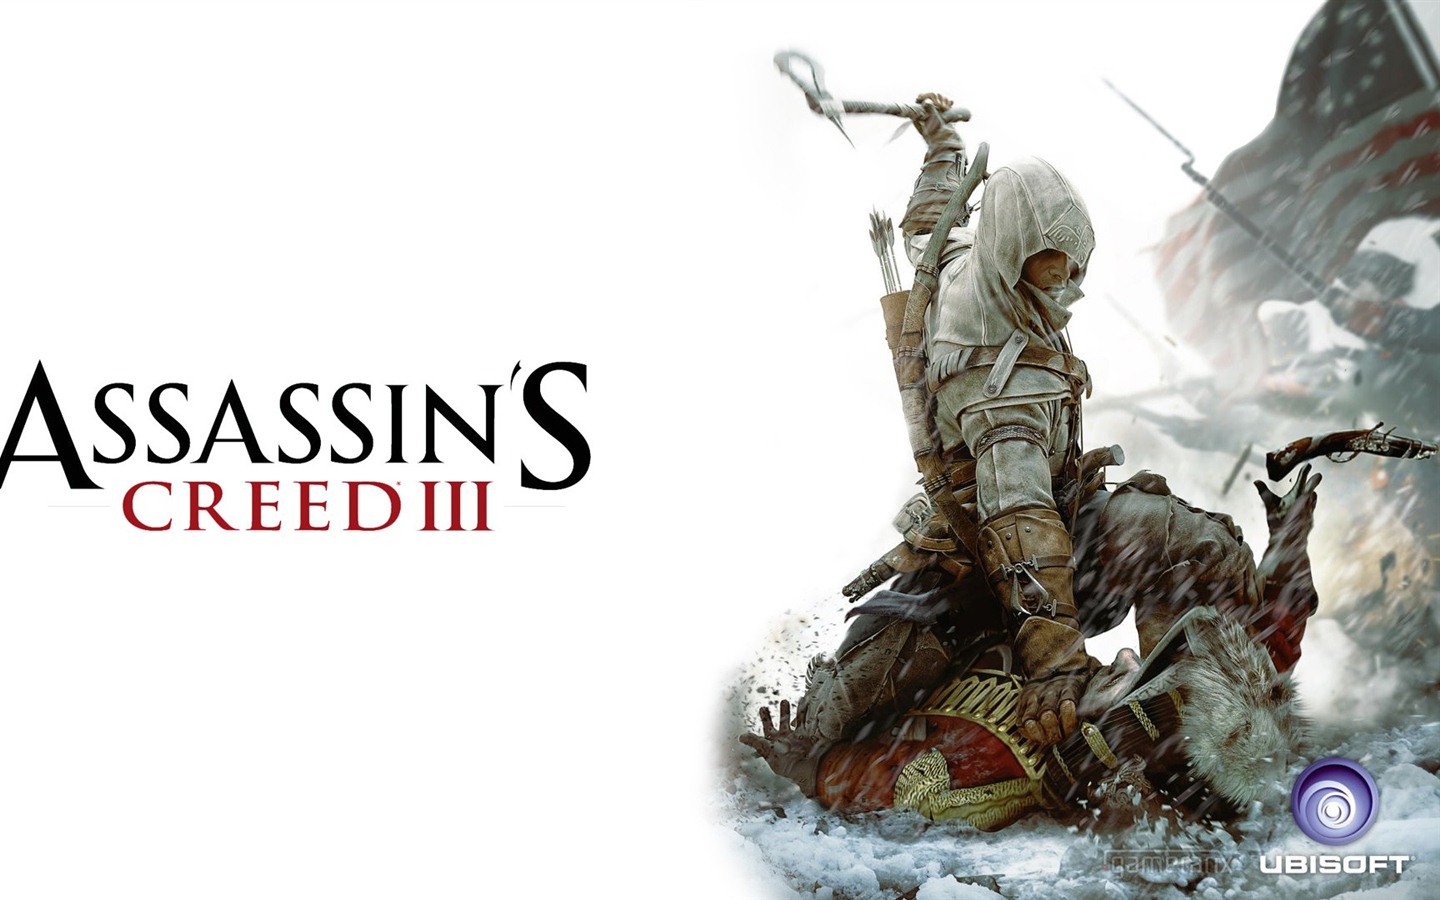 Assassin's Creed 3 HD wallpapers #13 - 1440x900